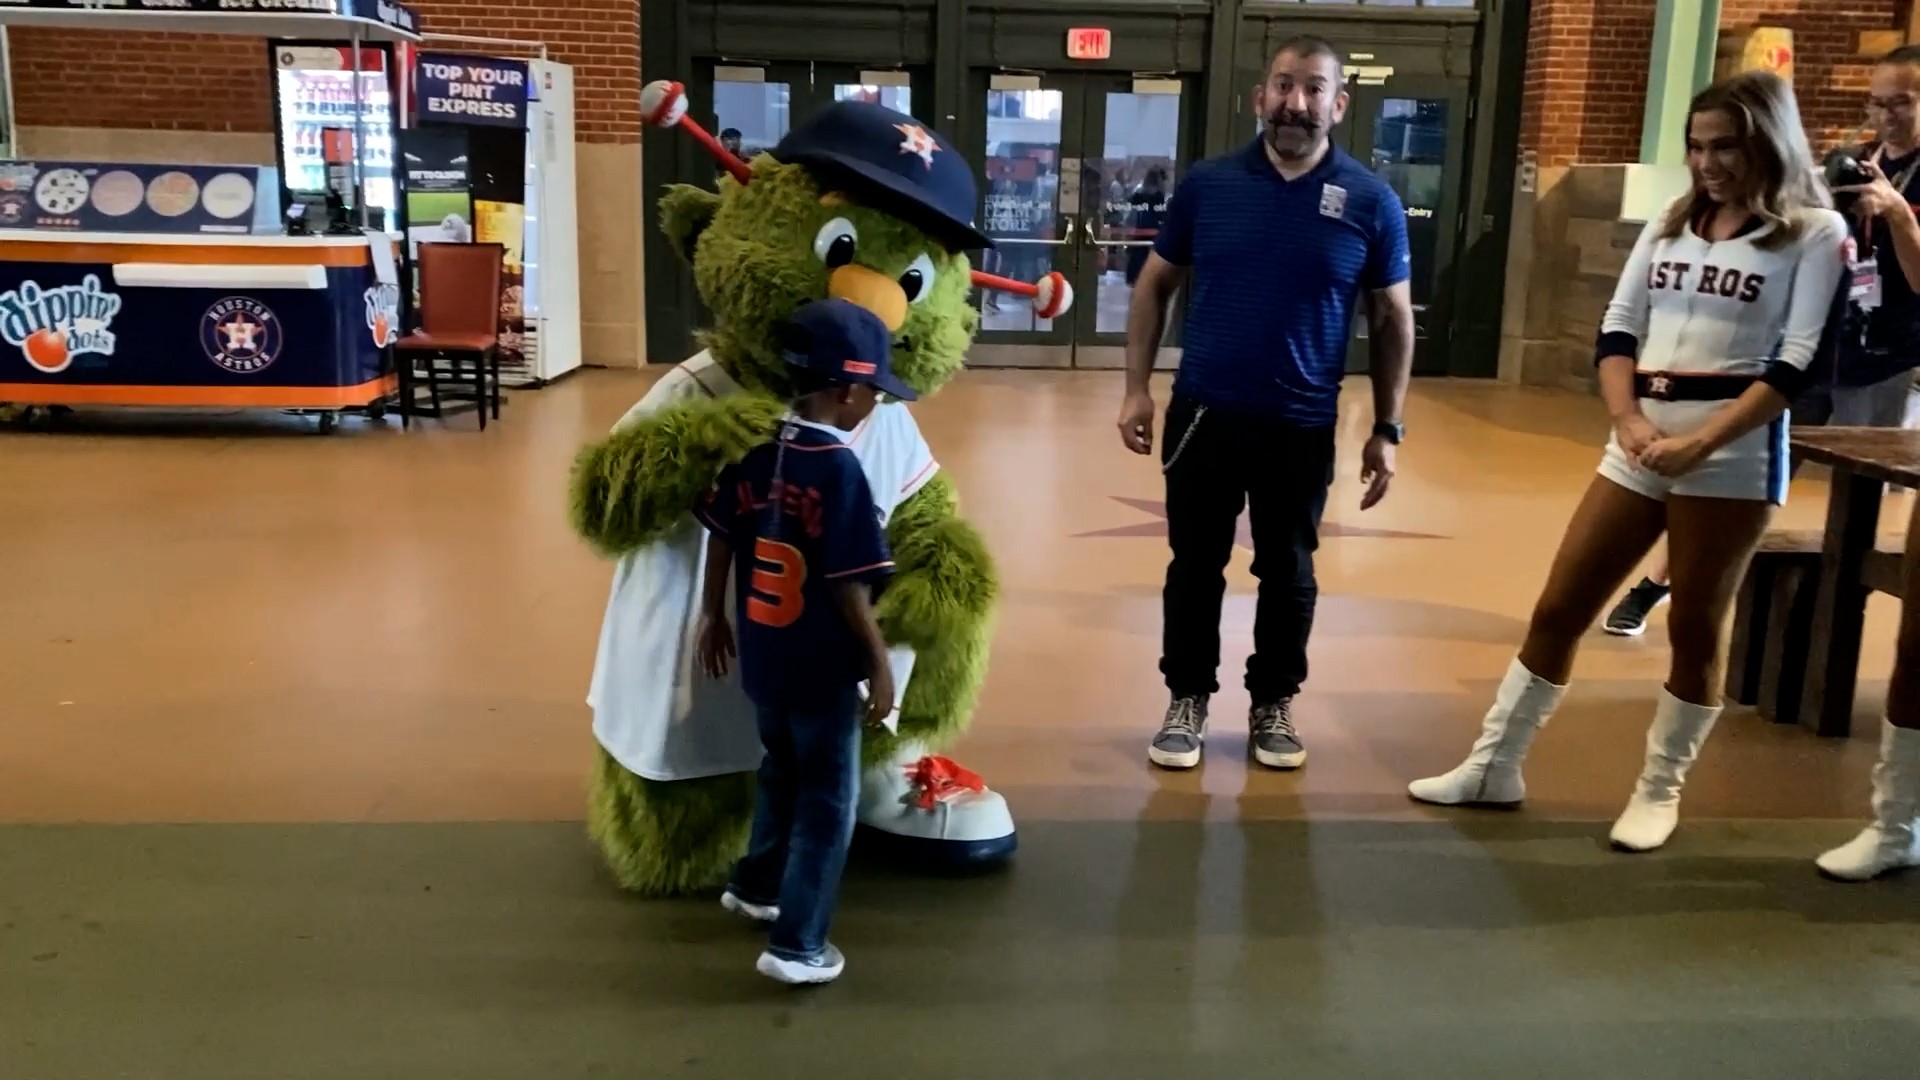 This 5-year-old superfan's favorite Astro is the team's mascot, Orbit.